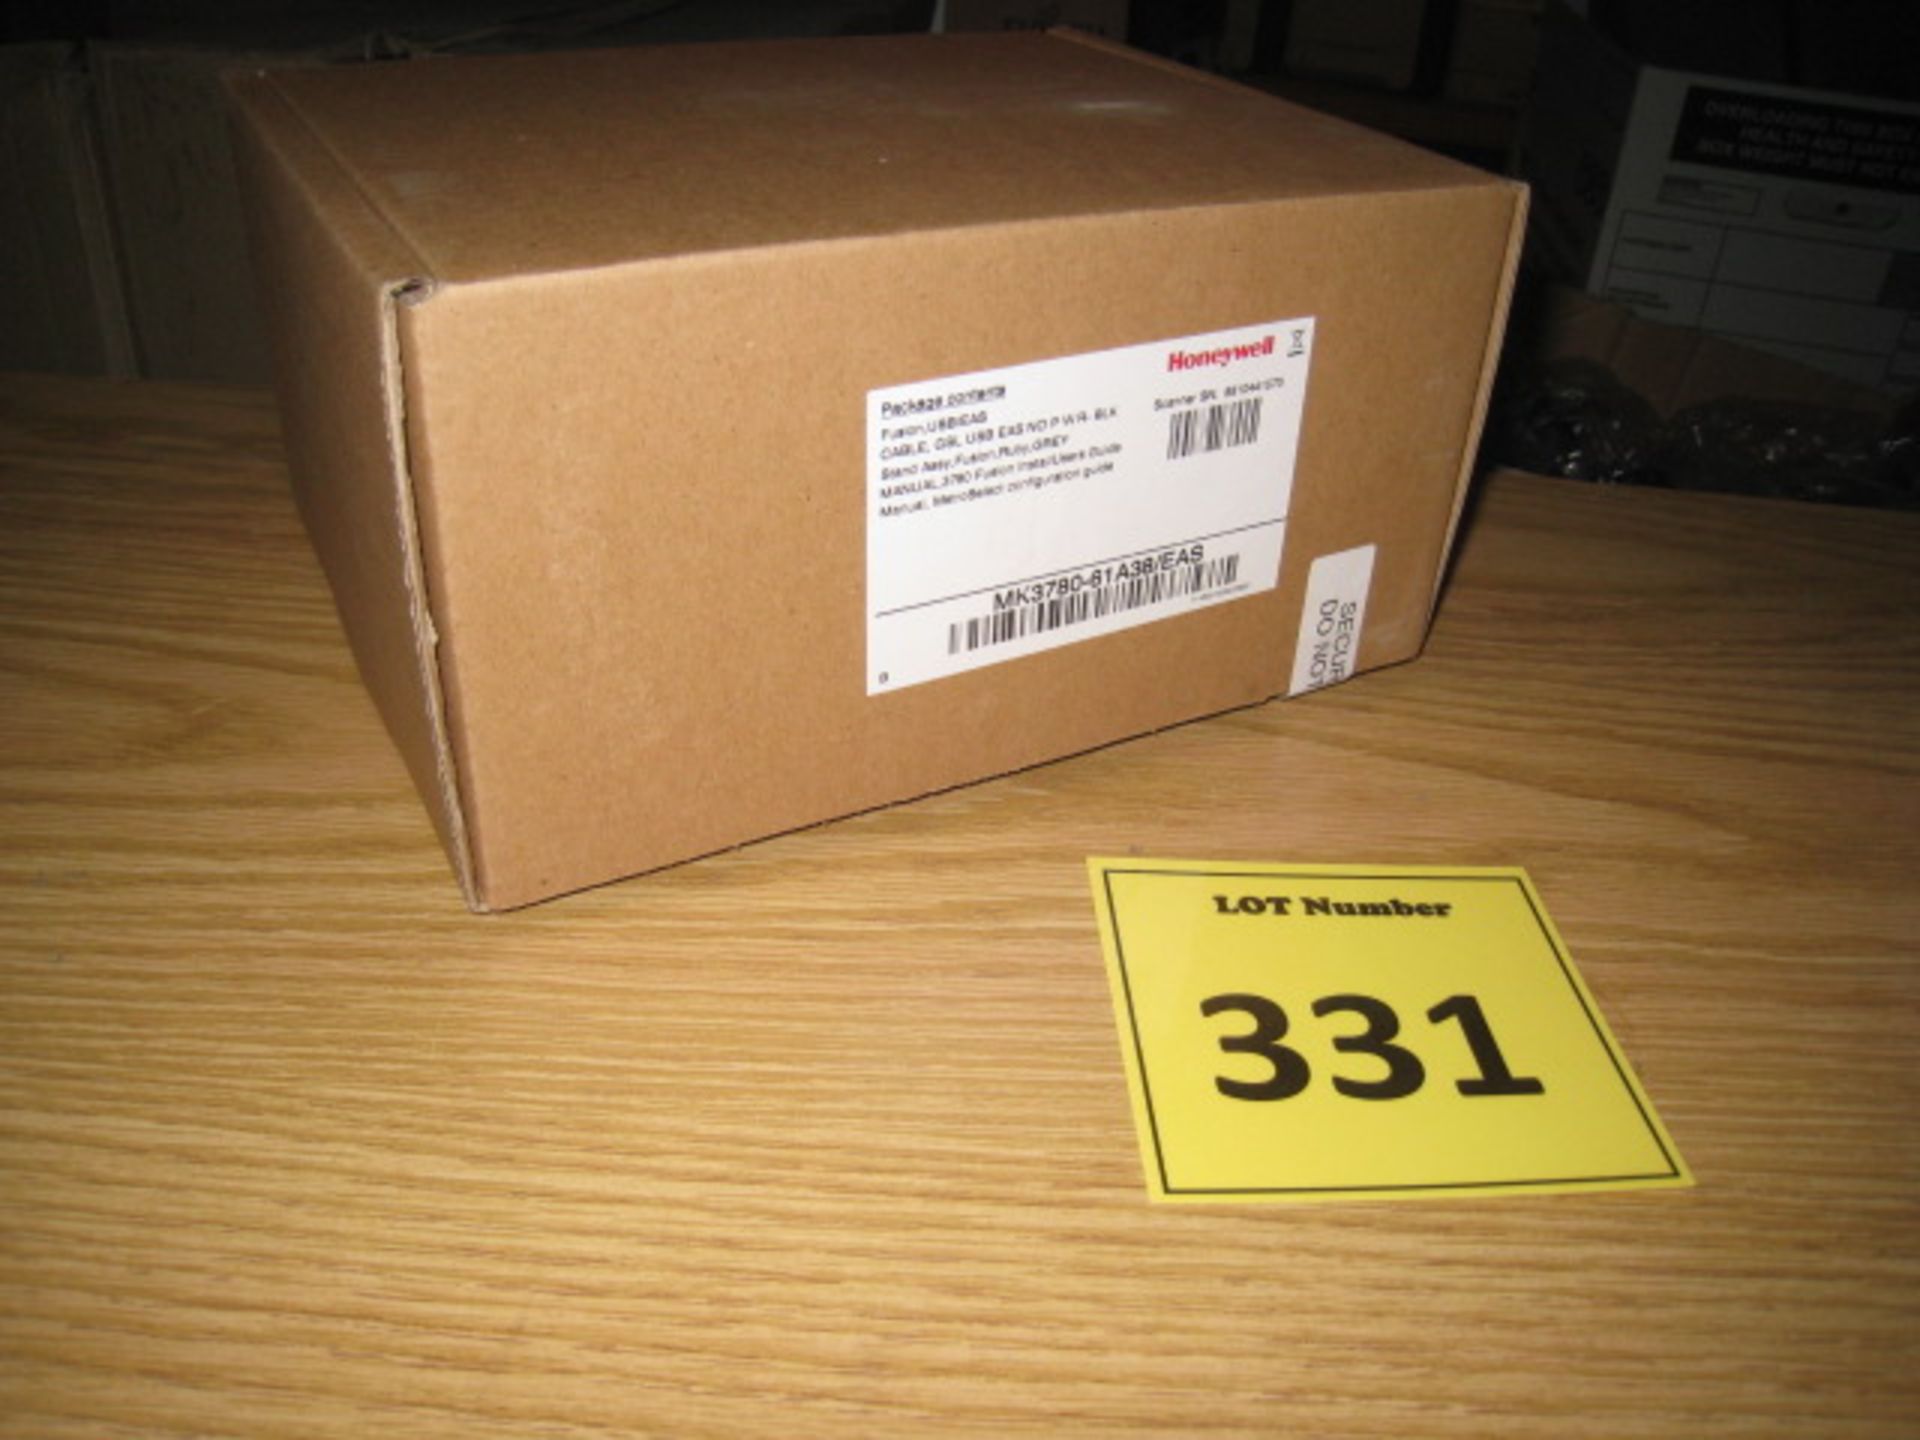 HONEYWELL MK3780-61A38/EAS BARCODE SCANNER NEW IN SEALED BOX. More info at: http://www.ebay.co.uk/